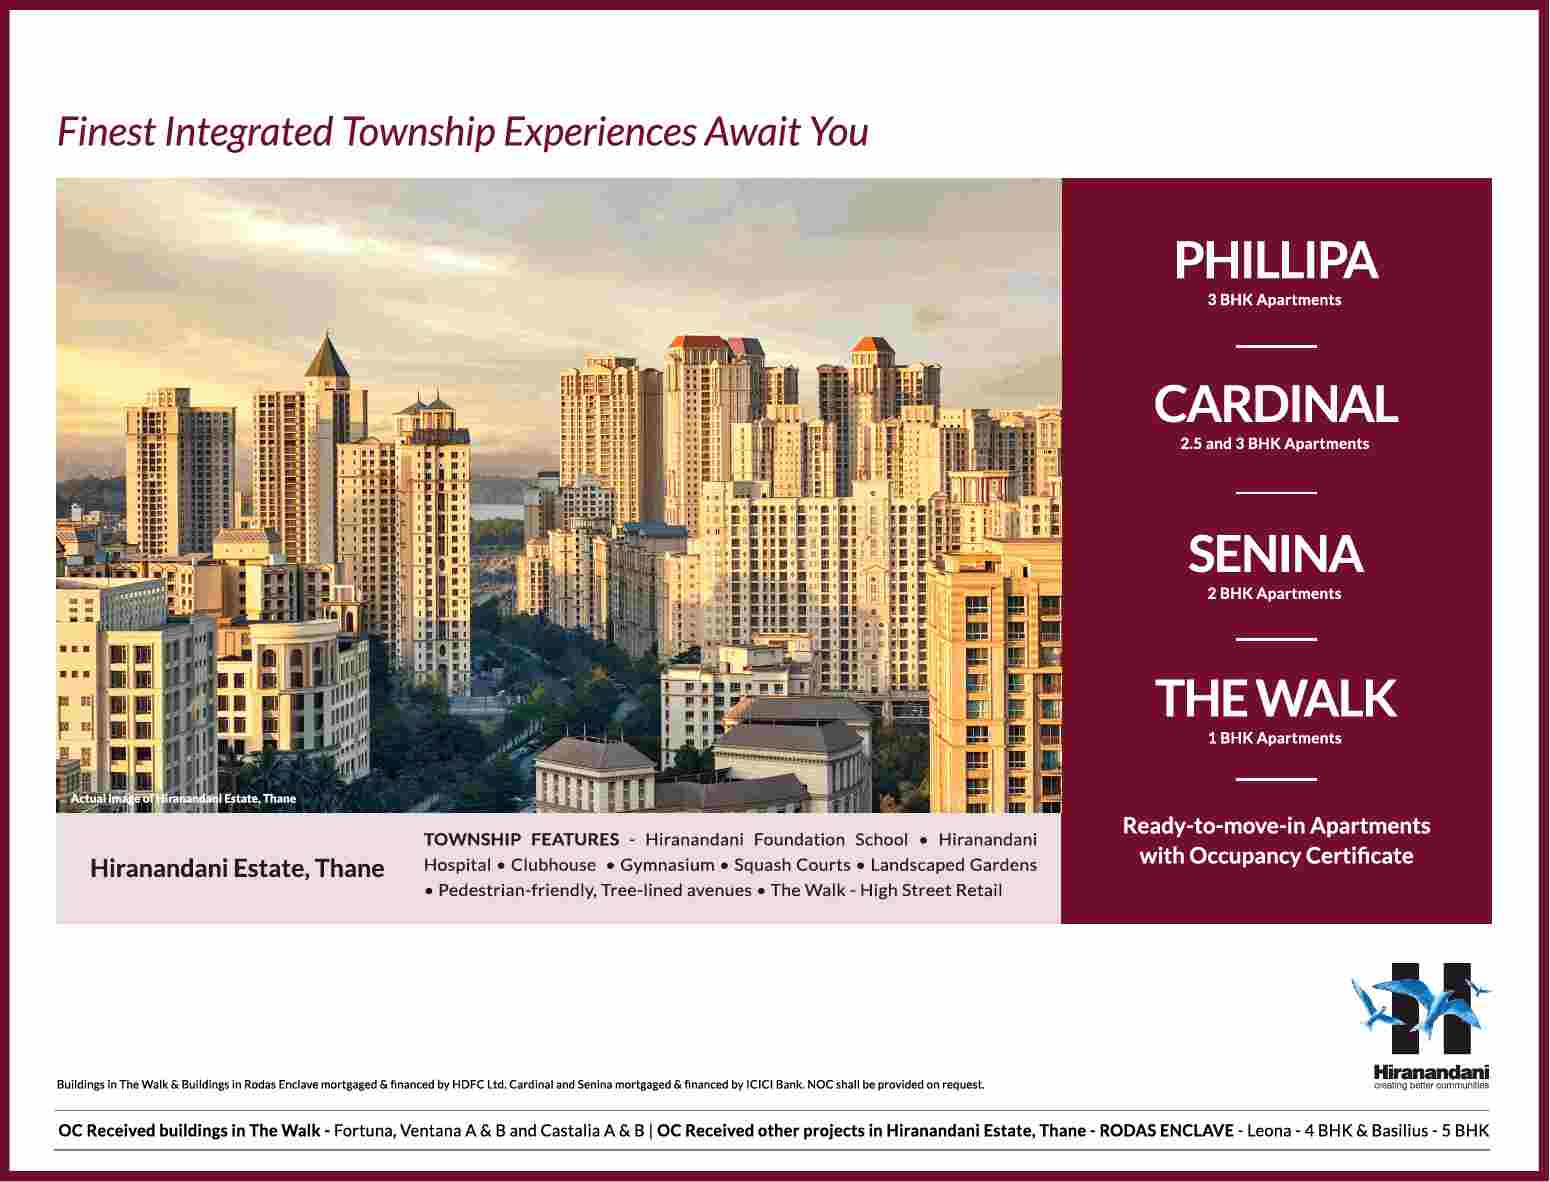 Finest integrated township experiences await you at Hiranandani in Mumbai Update